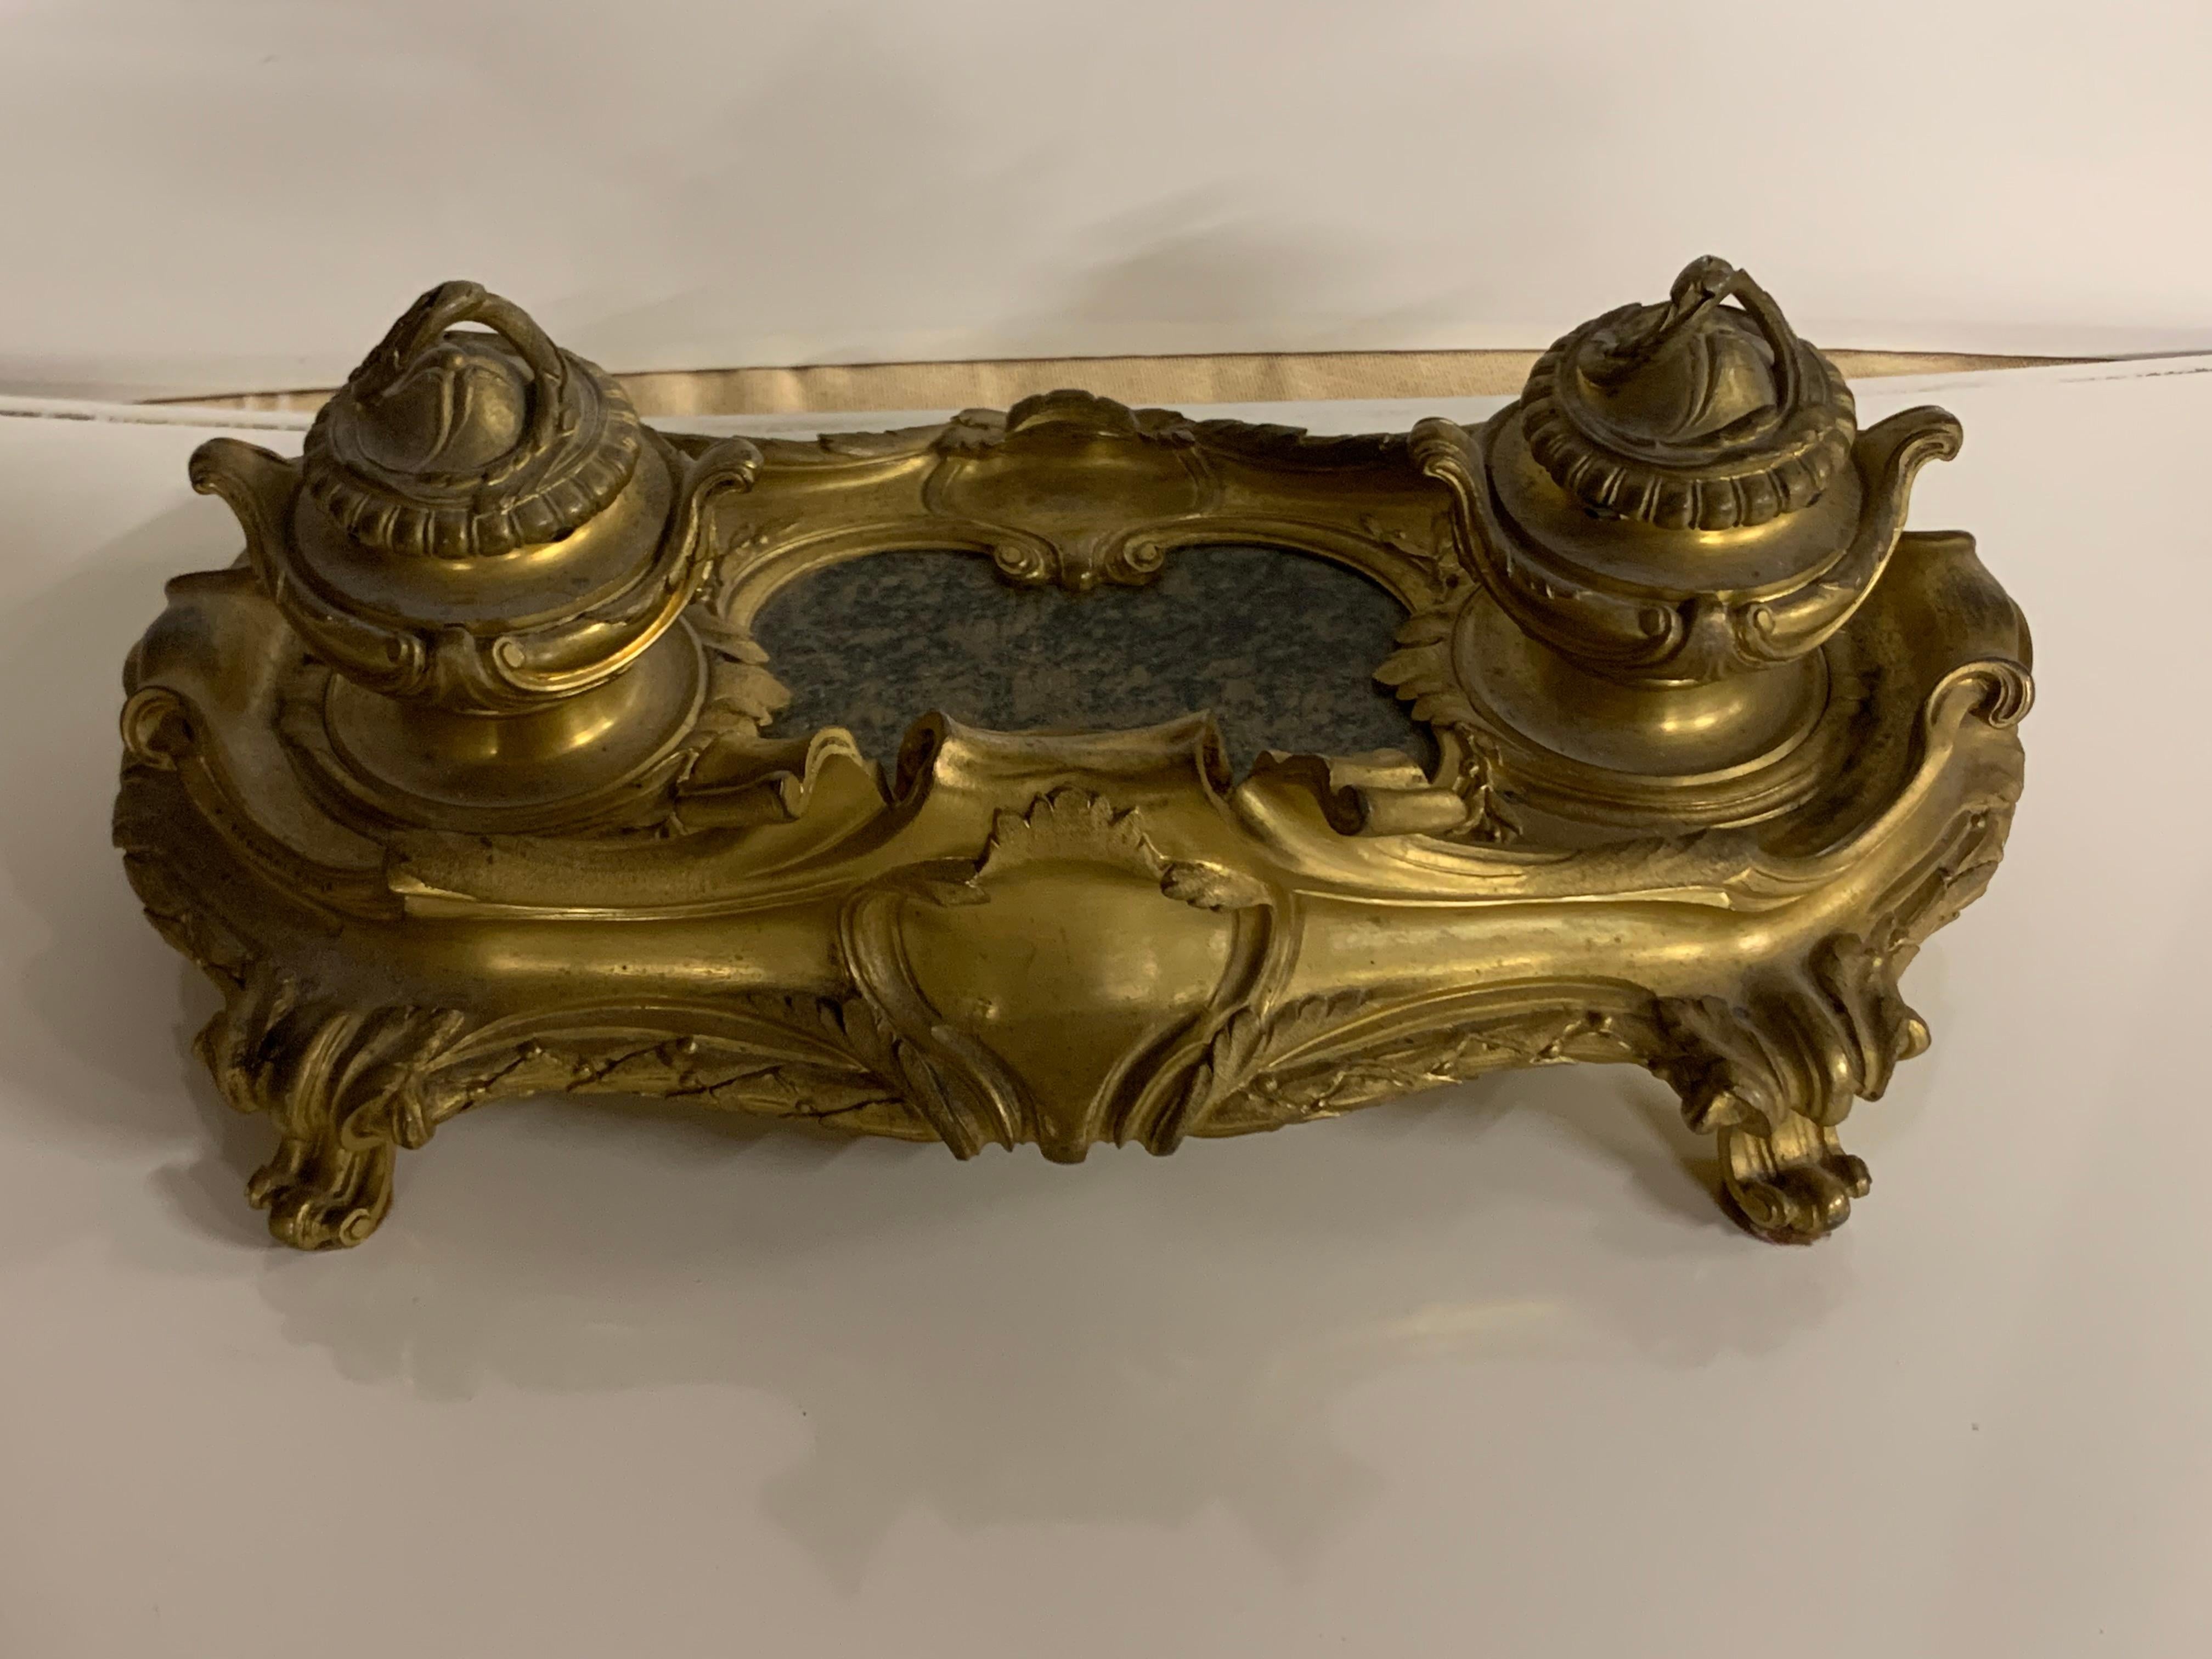 Louis XV style bronze inkwell ,in the middle you have a  marble plaque in the shape of  a heart ,the bronze are finely executed,original condition
Extremly rare this inkwell have its original glass interior